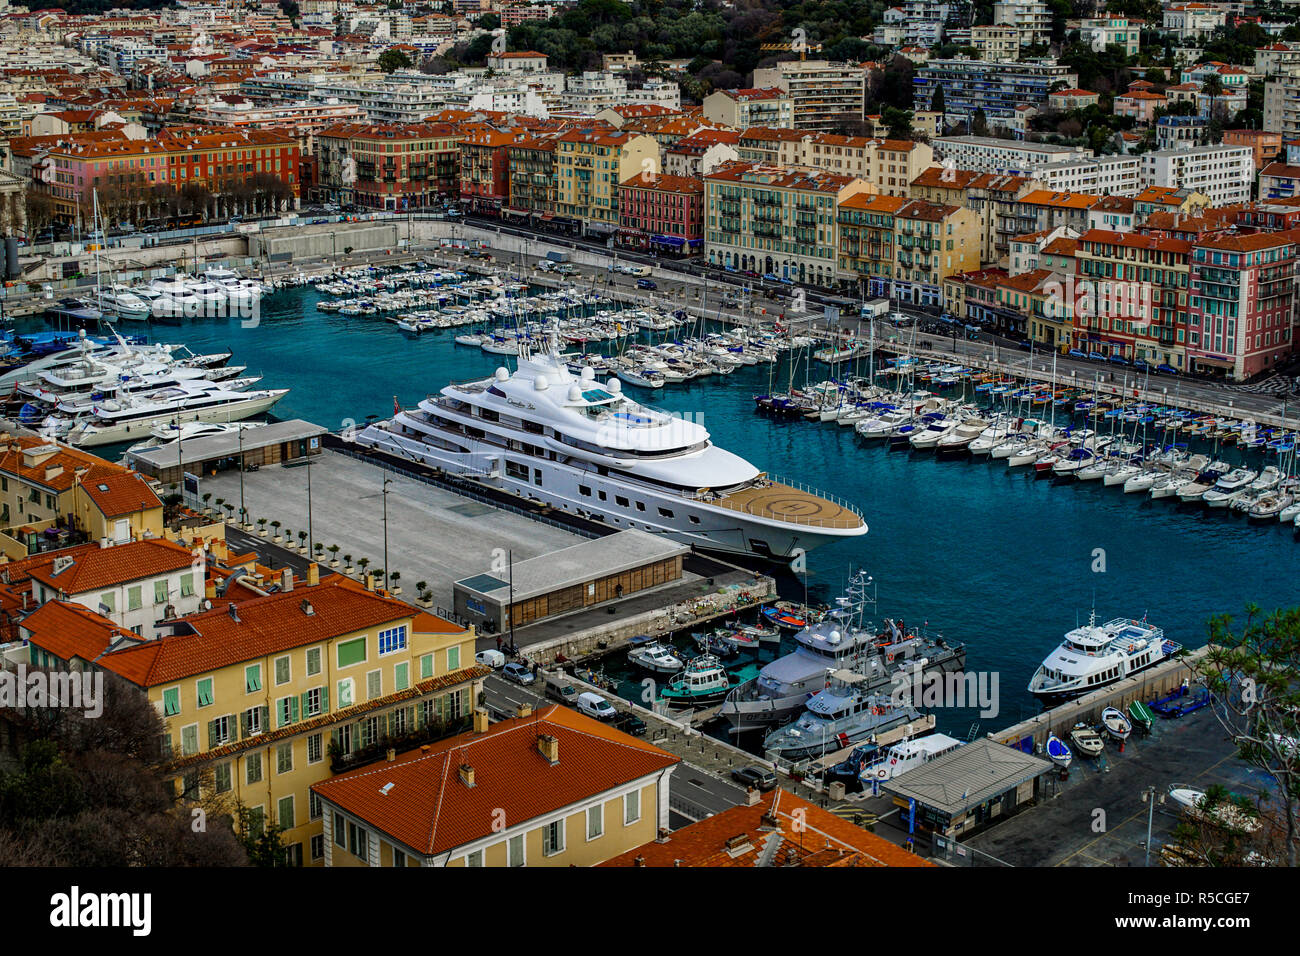 Old harbour in Nice France with colourful boats and yachts Stock Photo